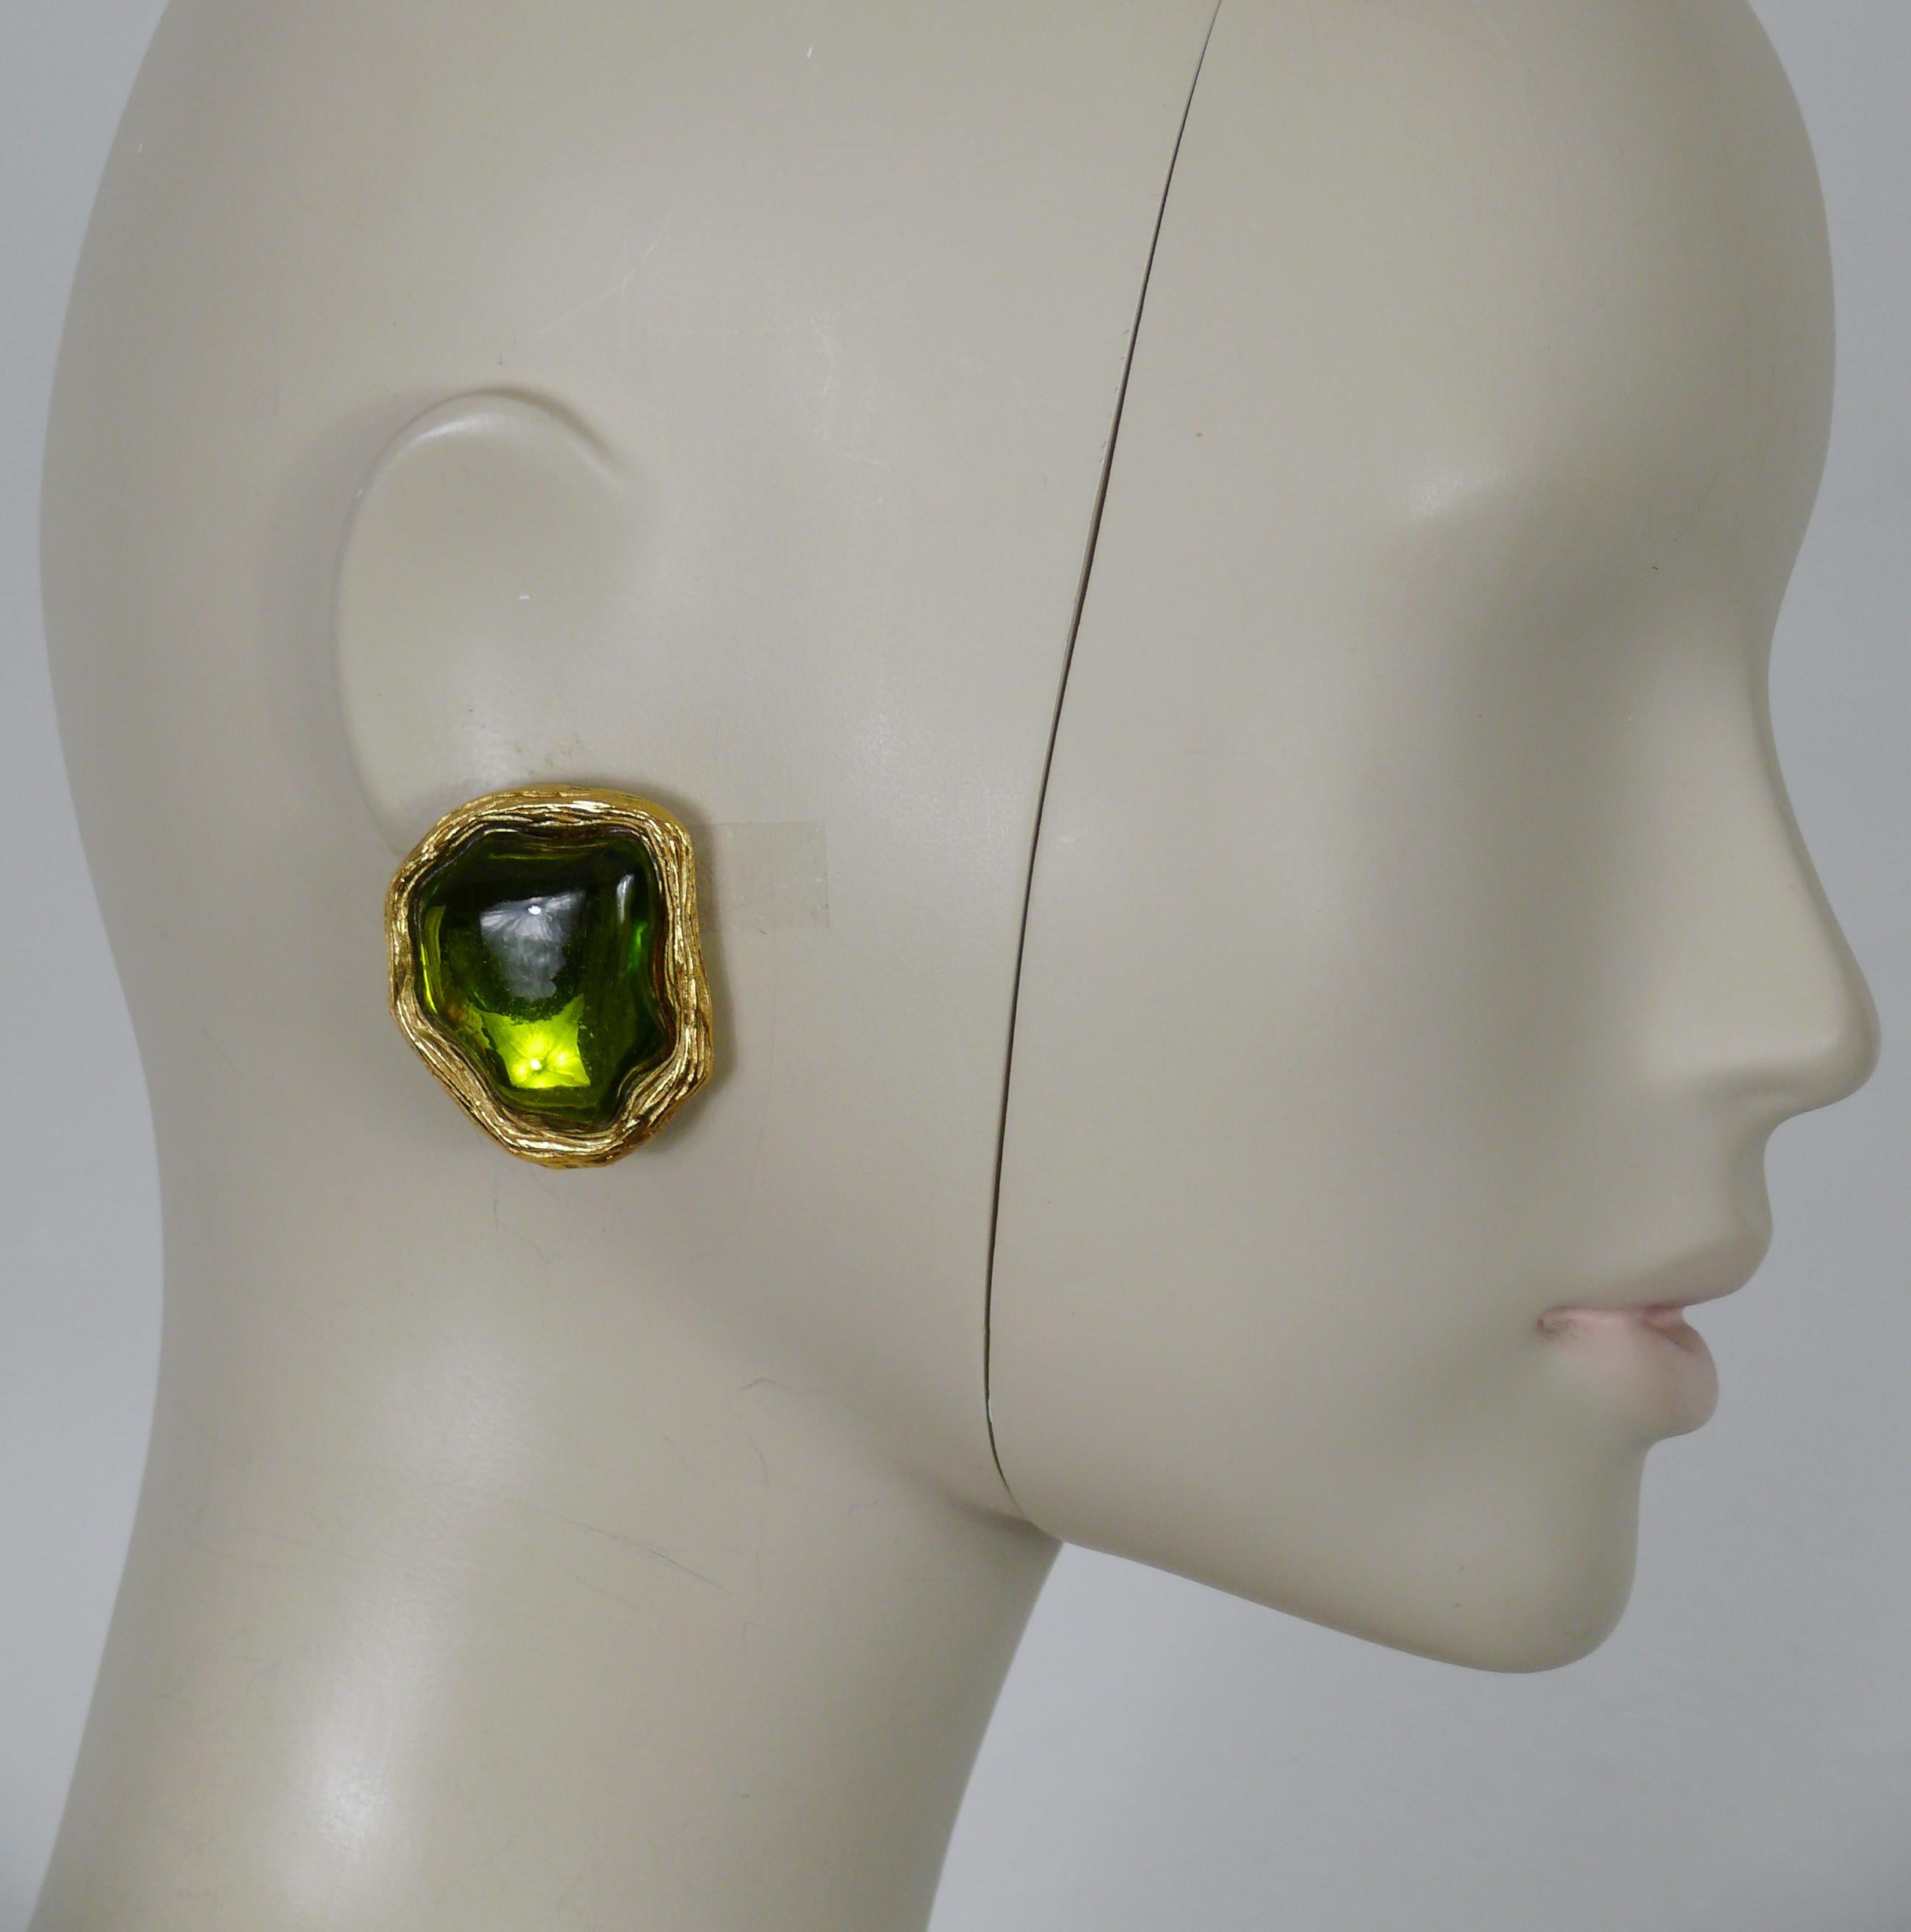 CHARLES JOURDAN vintage textured gold tone clip-on earrings embellished with a green resin cabochon.

Embossed CHARLES JOURDAN Paris.

Indicative measurements : height approx. 3.8 cm (1.50 inches) / max. width approx. 3.1 cm (1.22 inches).

Weight